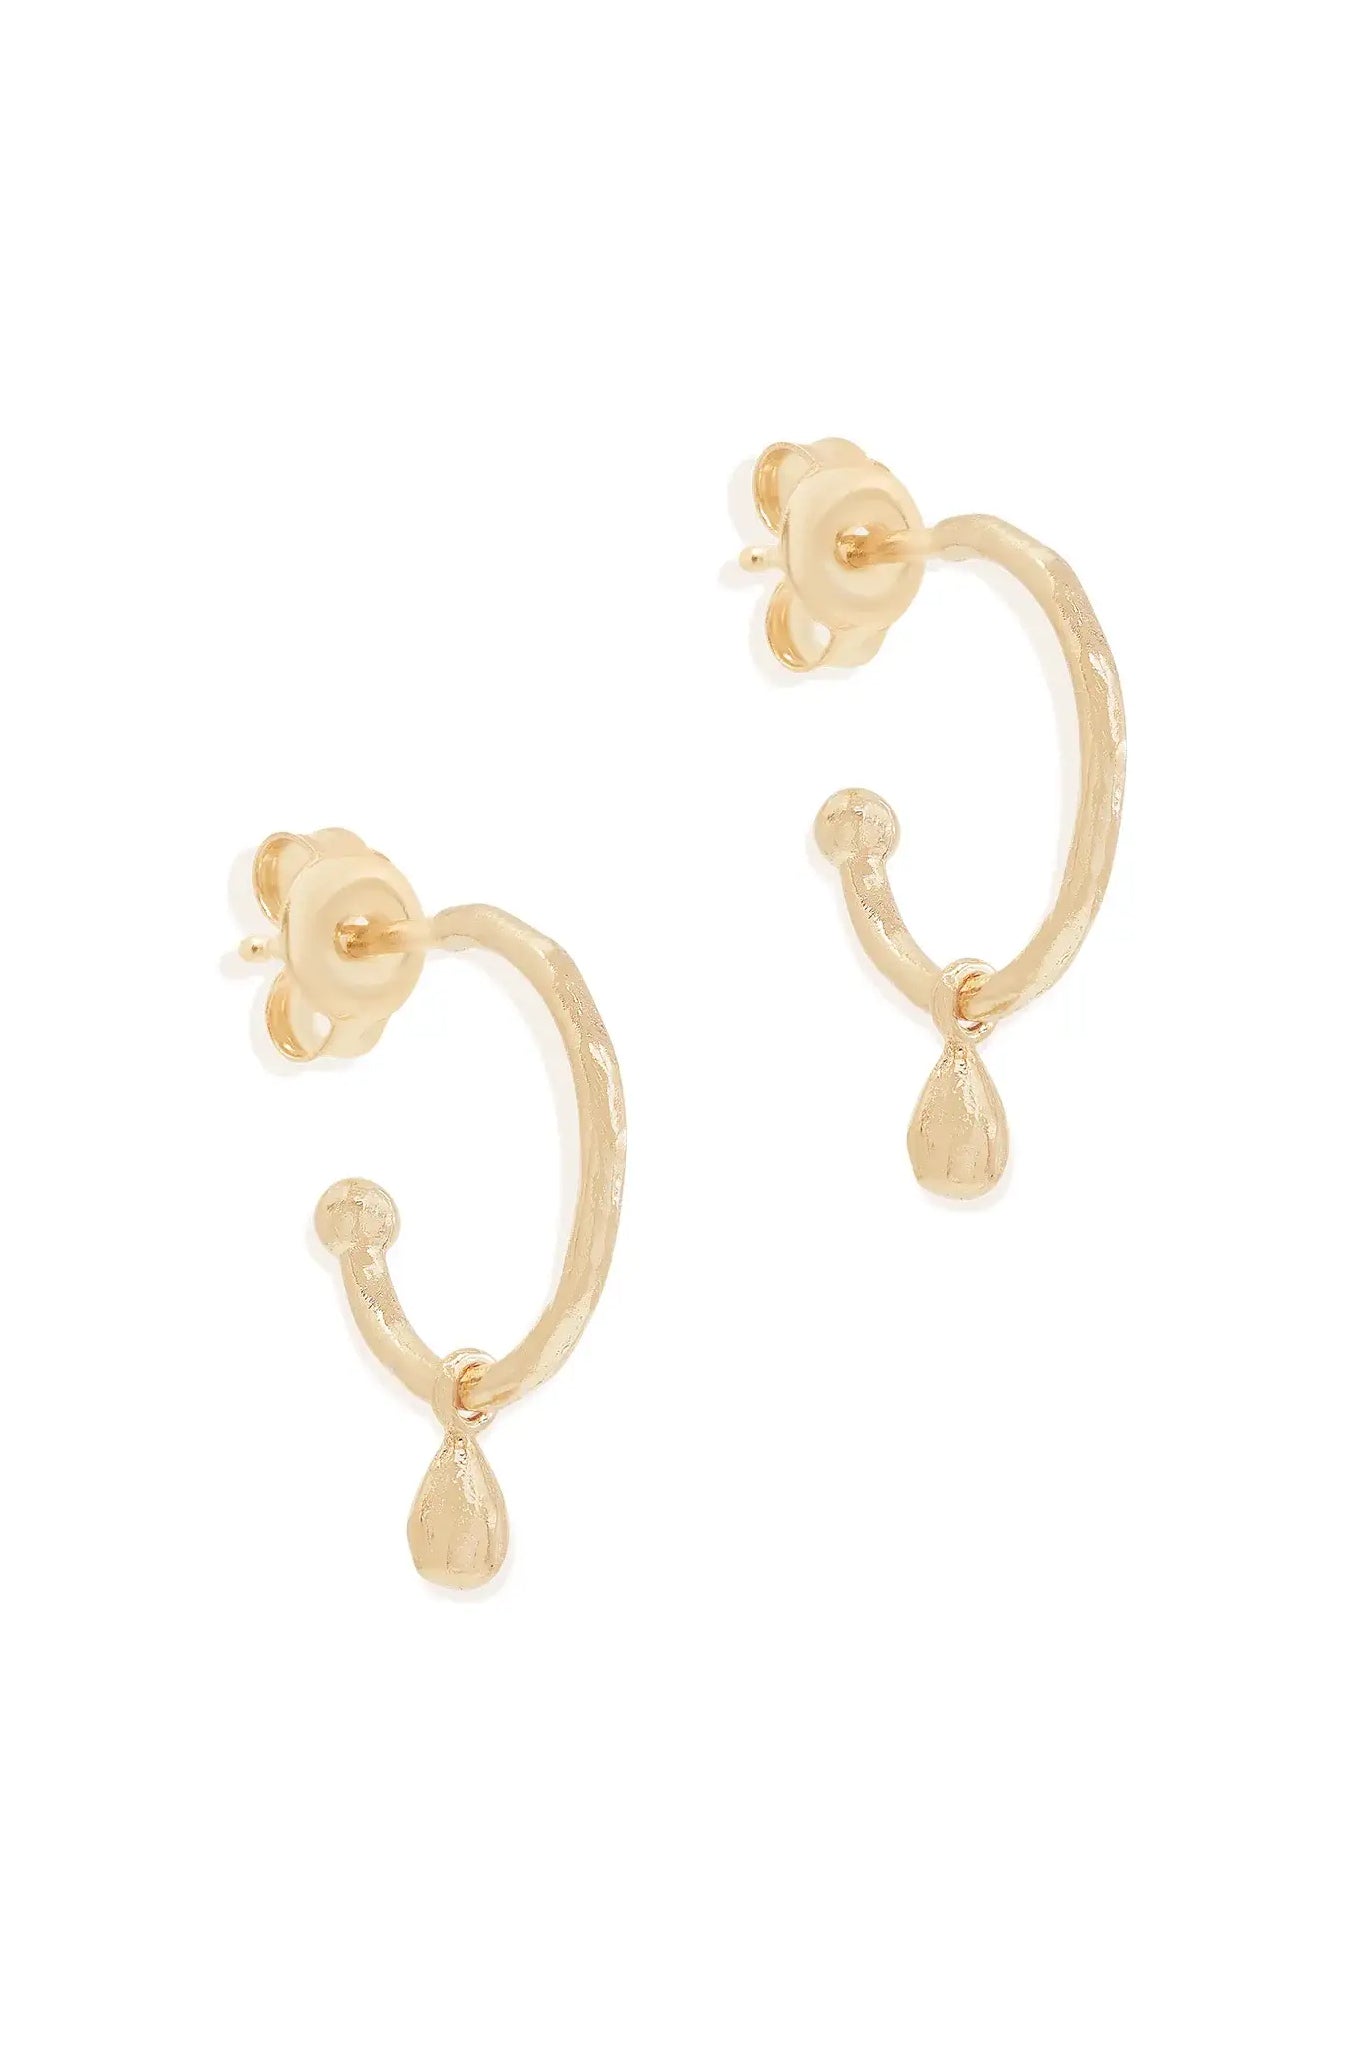 BY CHARLOTTE DIVINE GRACE HOOP  The By Charlotte Divine Grace Hoops are gorgeous feminine open hoops in a stud-style, which can be worn to add simple sophistication to any outfit.